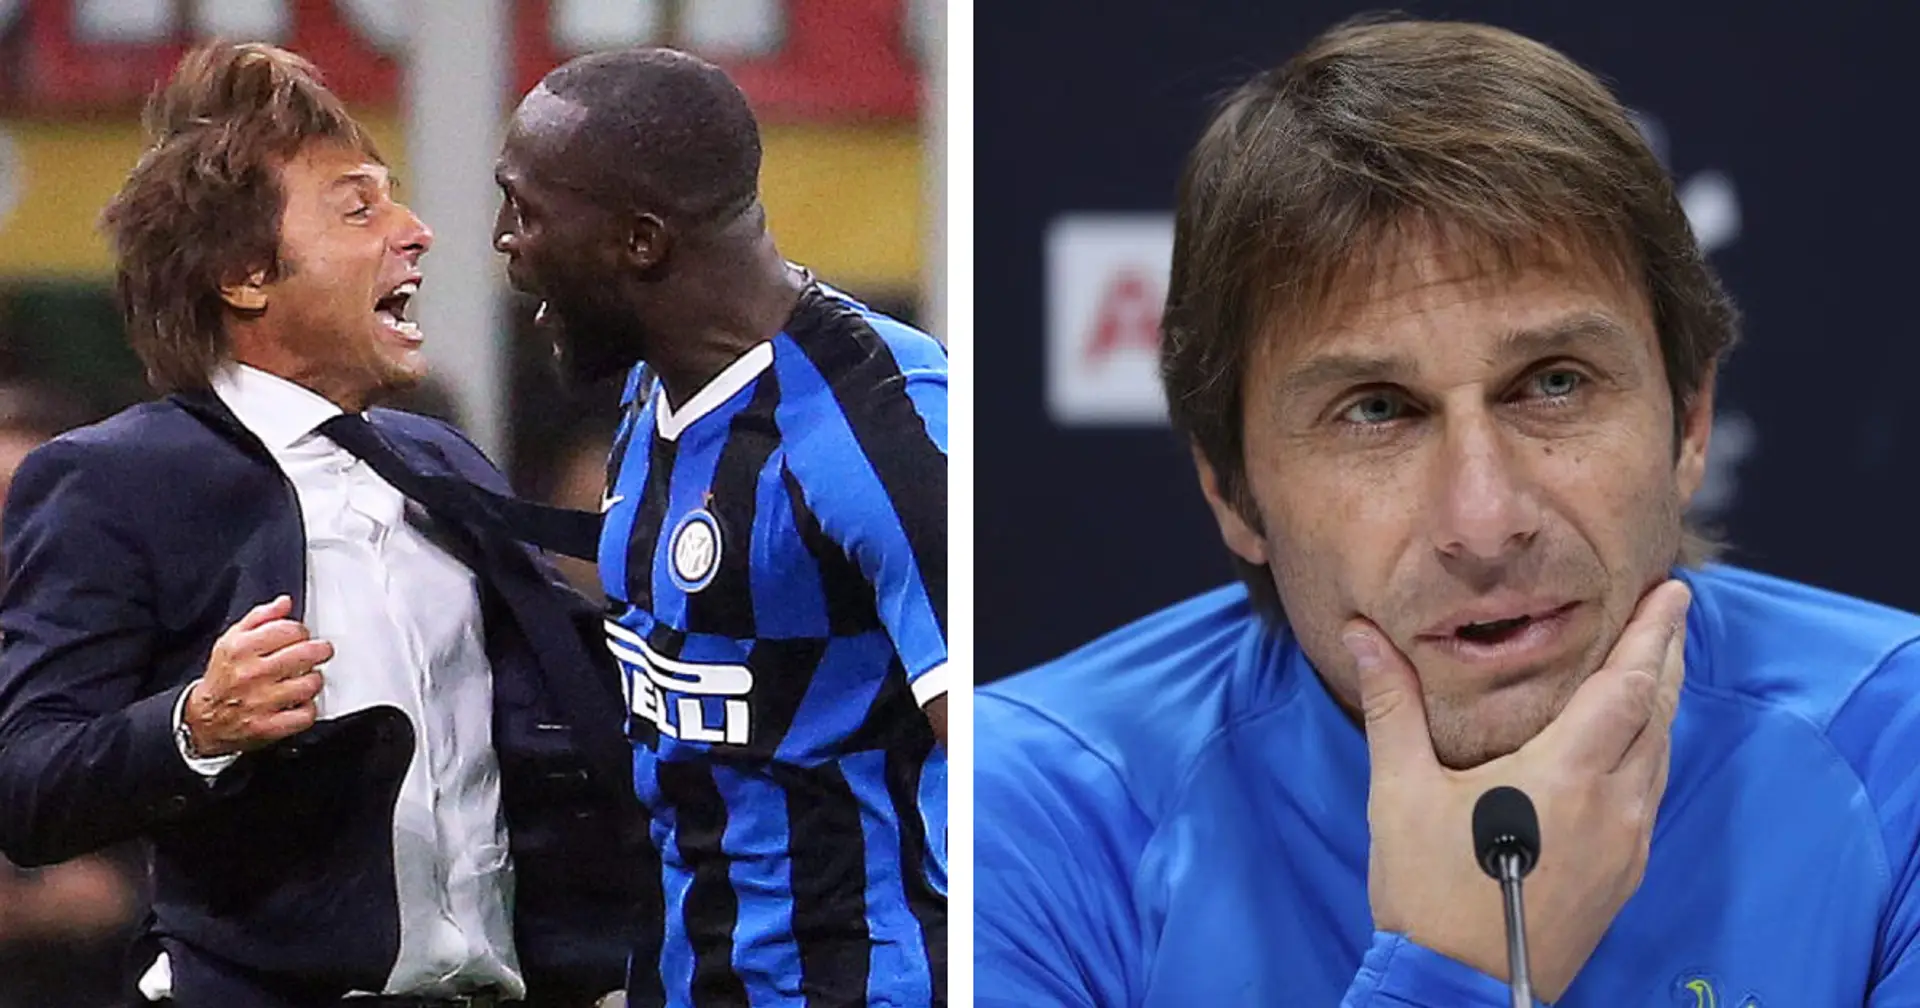 'I have great affection for him but I won't talk about it': Conte responds to question about Lukaku saga